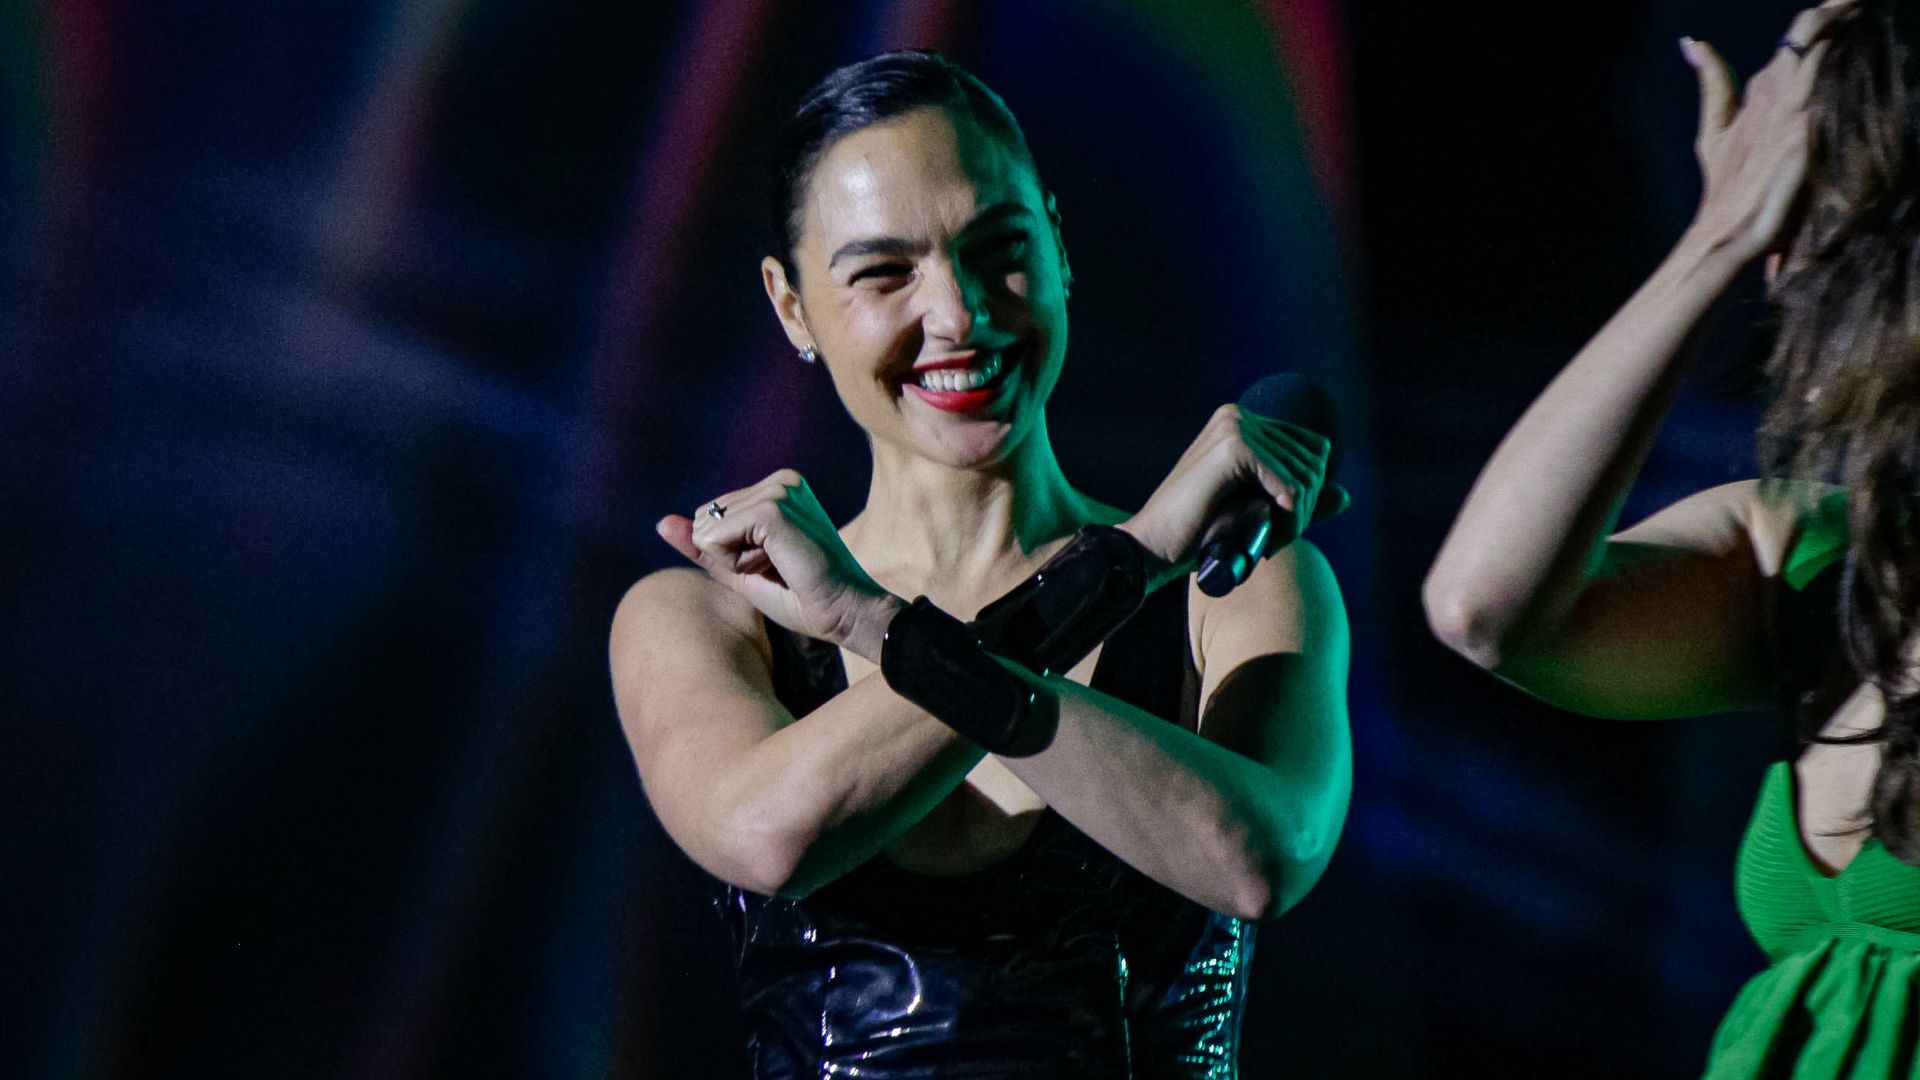 Gal Gadot, Israeli model and actress, is on stage at the global Netflix fan event "Tudum." After two years as a virtual event, "Tudum" brought thousands of fans together on location and could be streamed worldwide. The gathering is named after the sound t